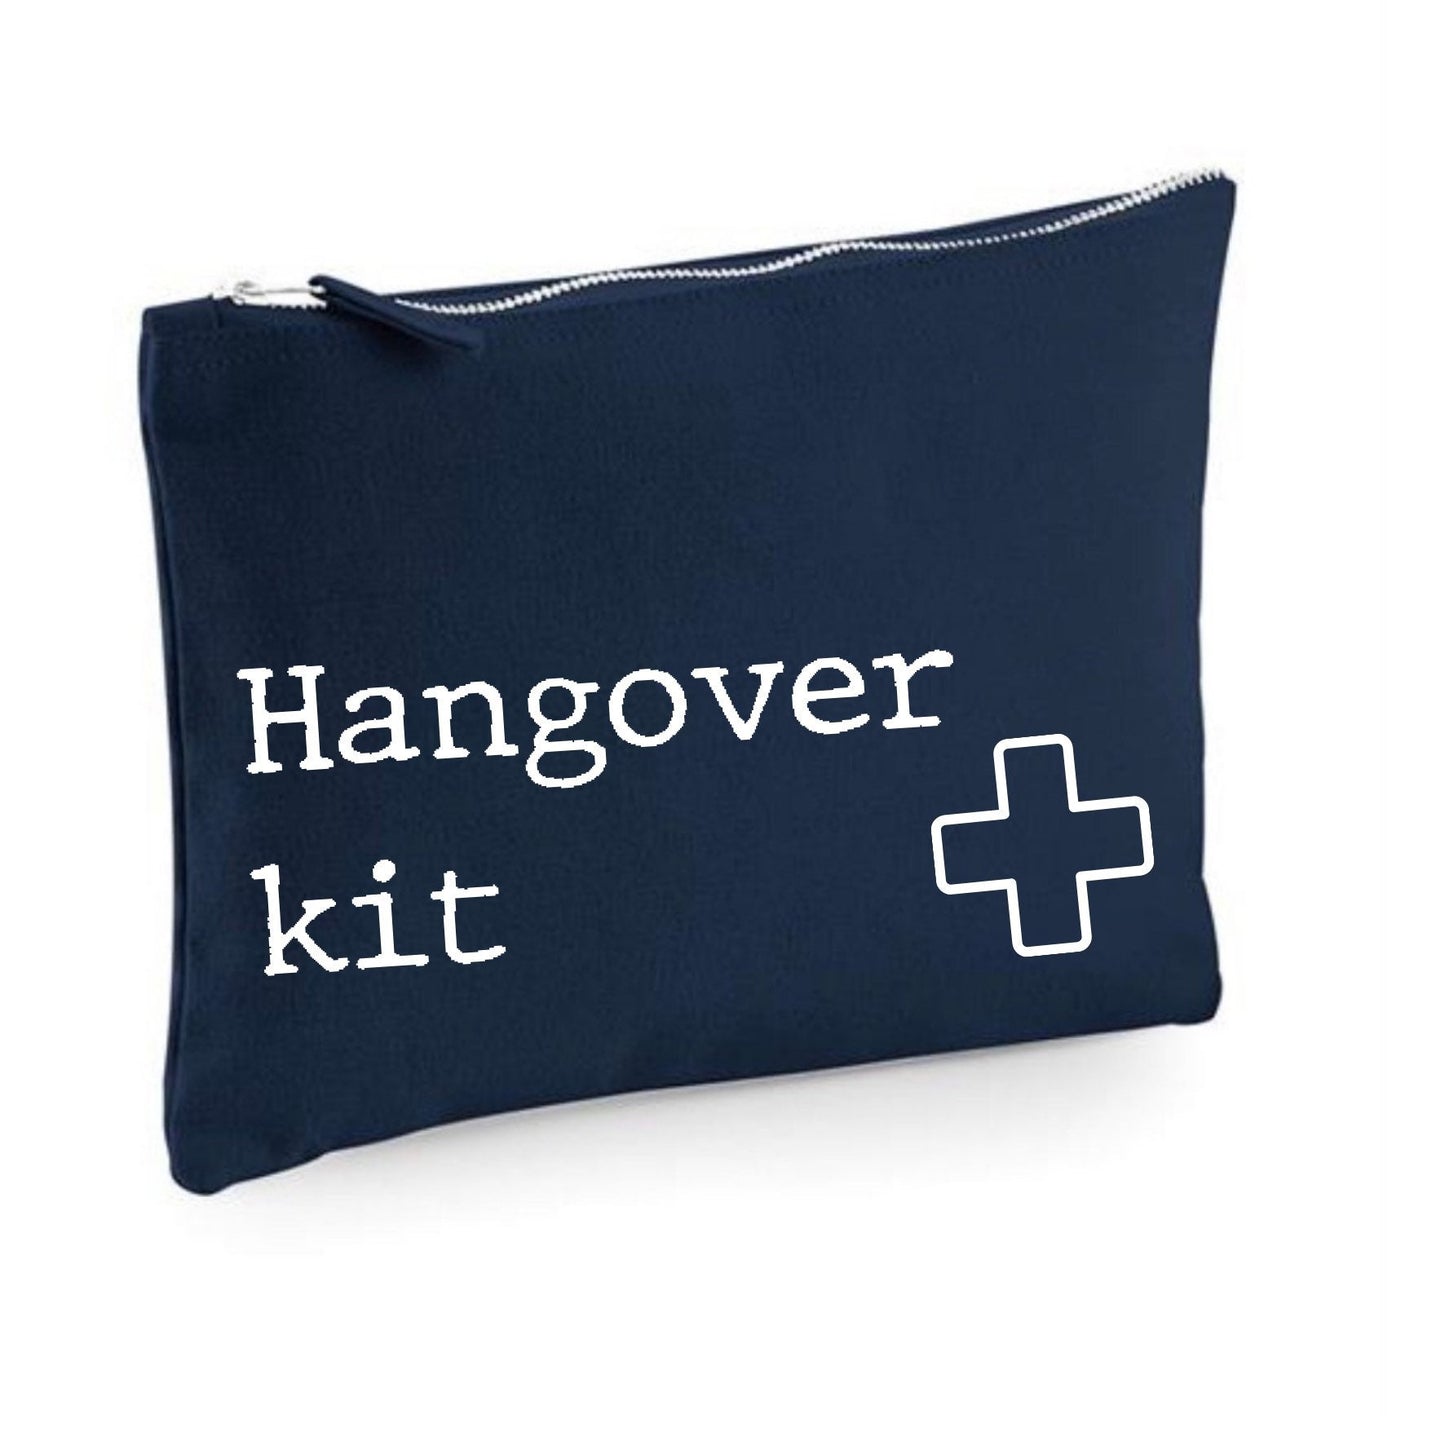 Hangover kit bag, bridal party hangover kit pouch, first aid bag, hen and stag do hangover kit, bachelorette hangover cure essentials